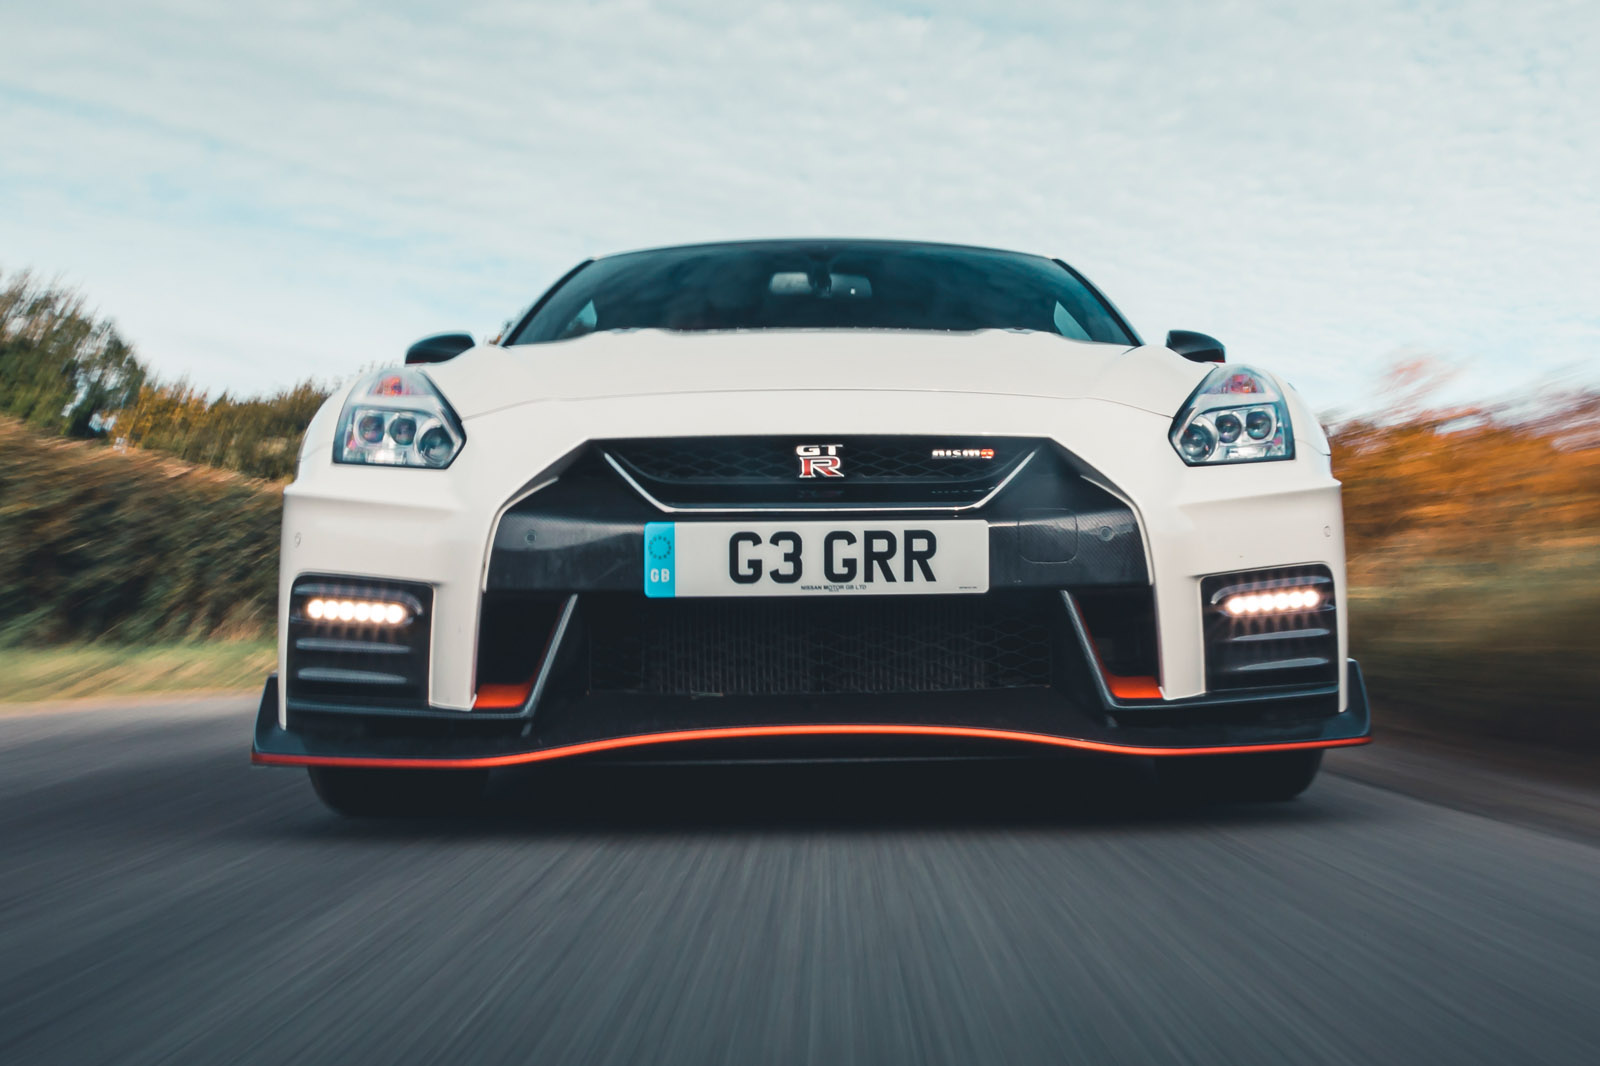 2020 Nissan GT-R Nismo Gets R34 Face Swap, Looks Like a Perfect